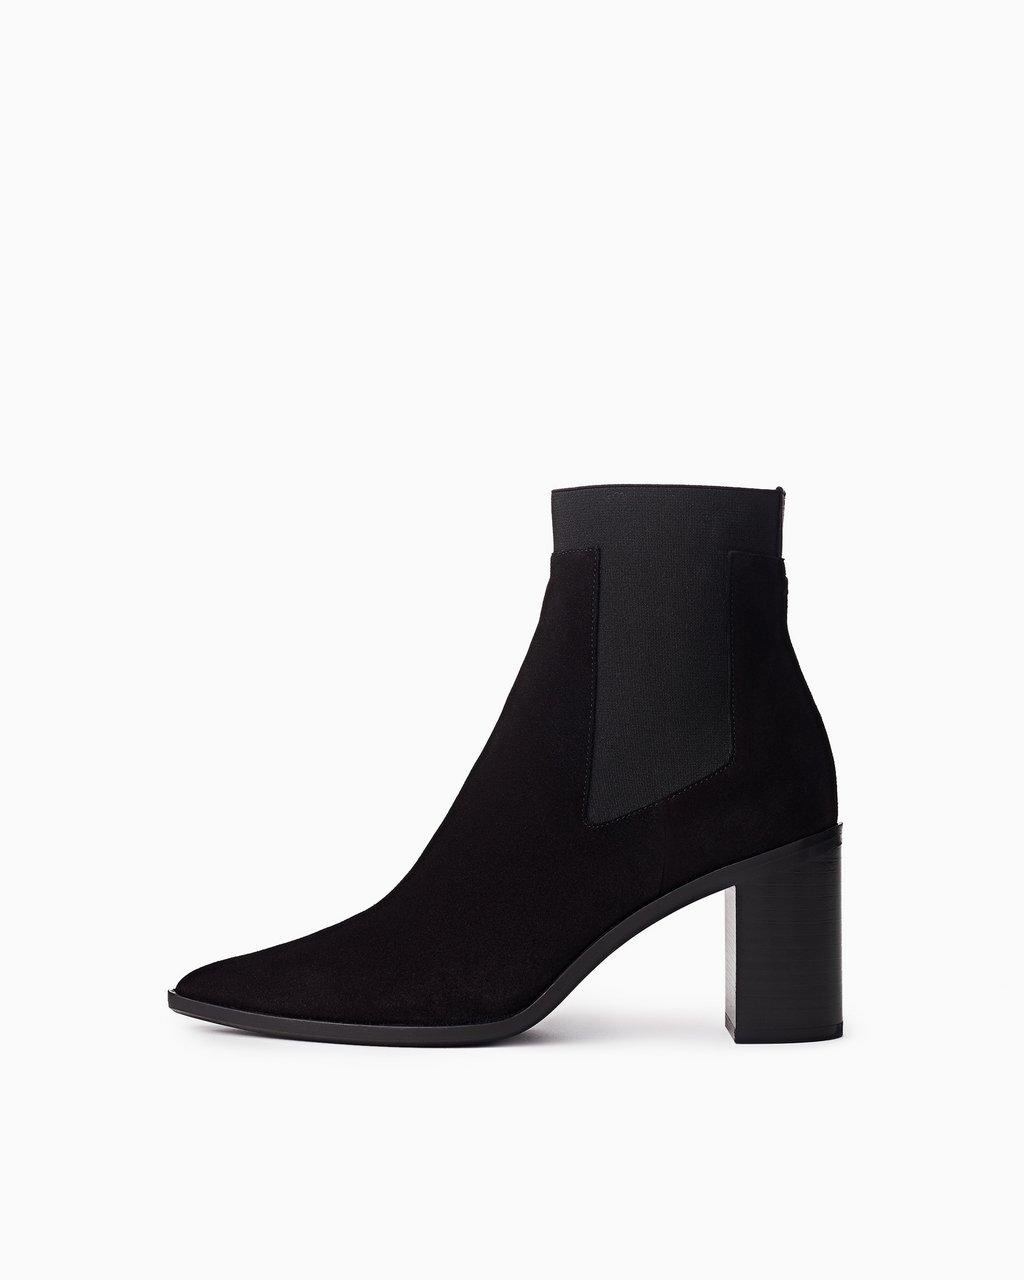 black boots available from Steve Madden at a discounted price